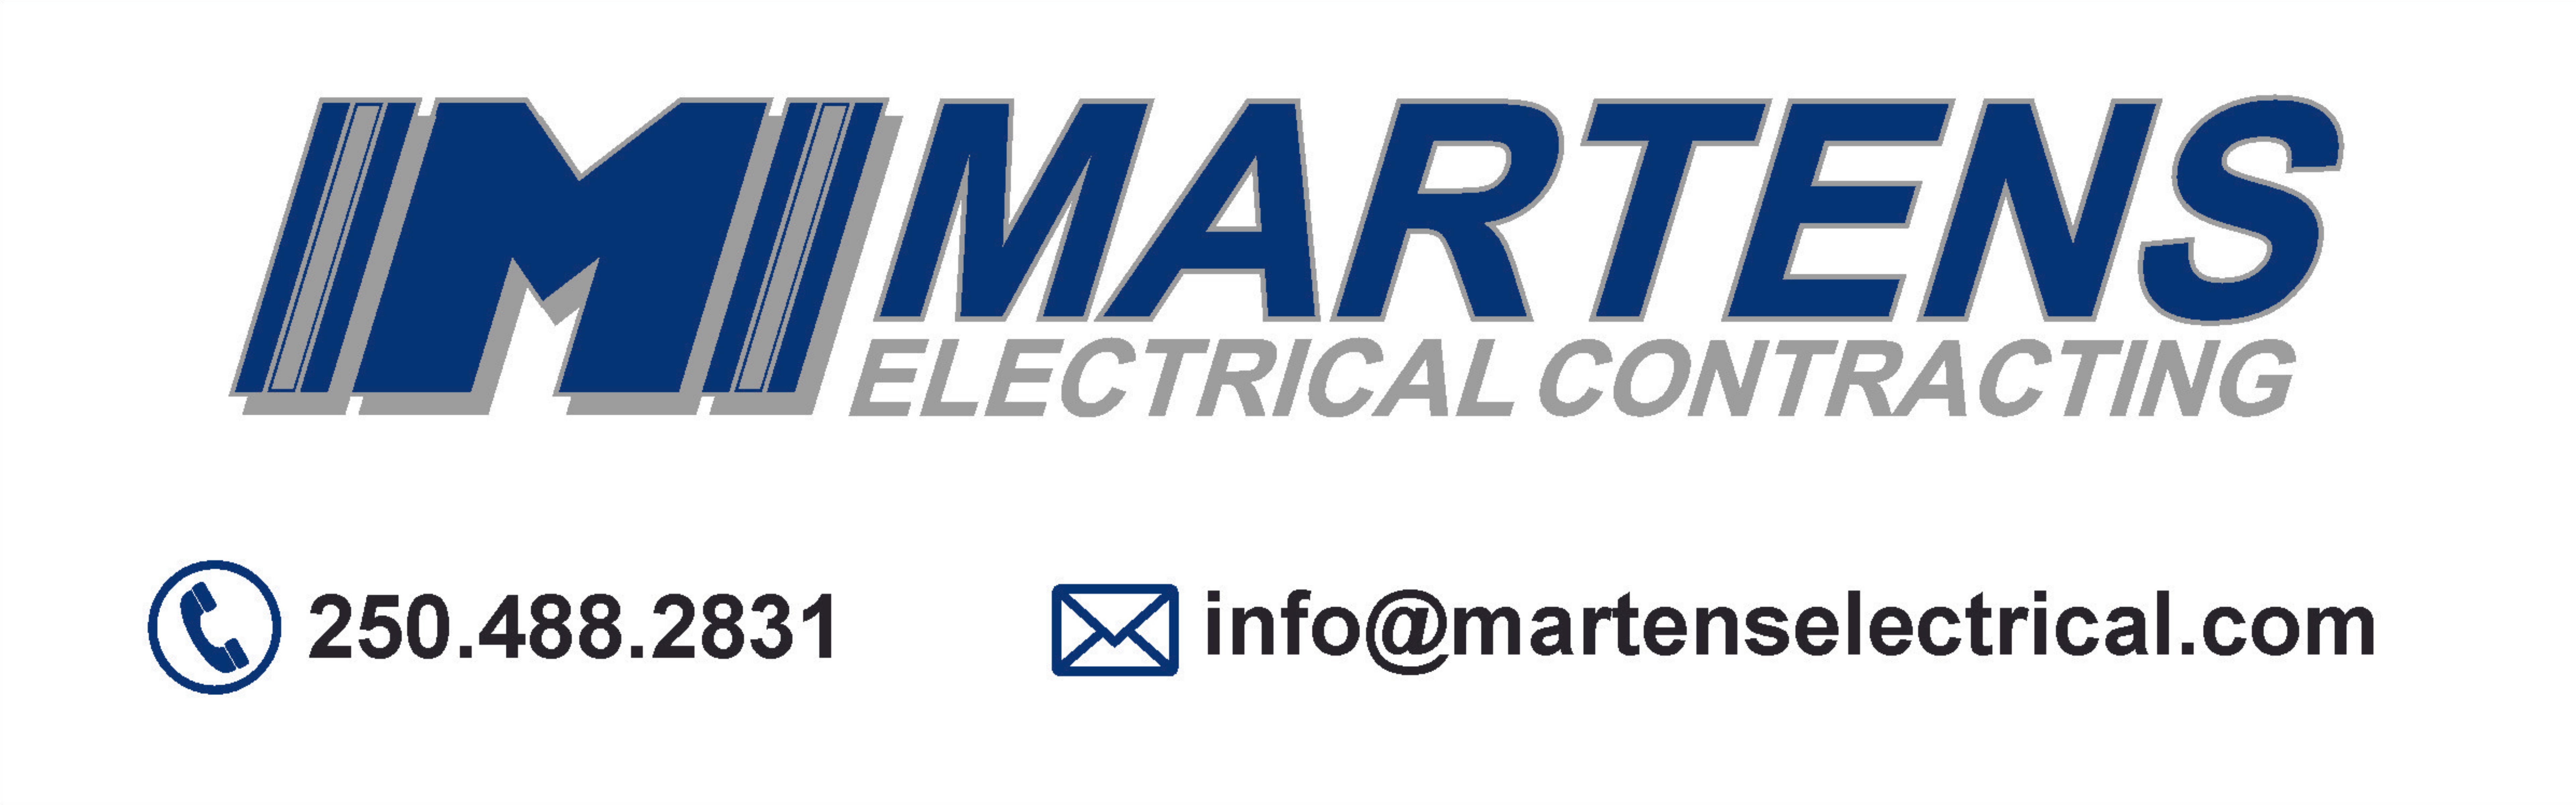 Martens Electrical